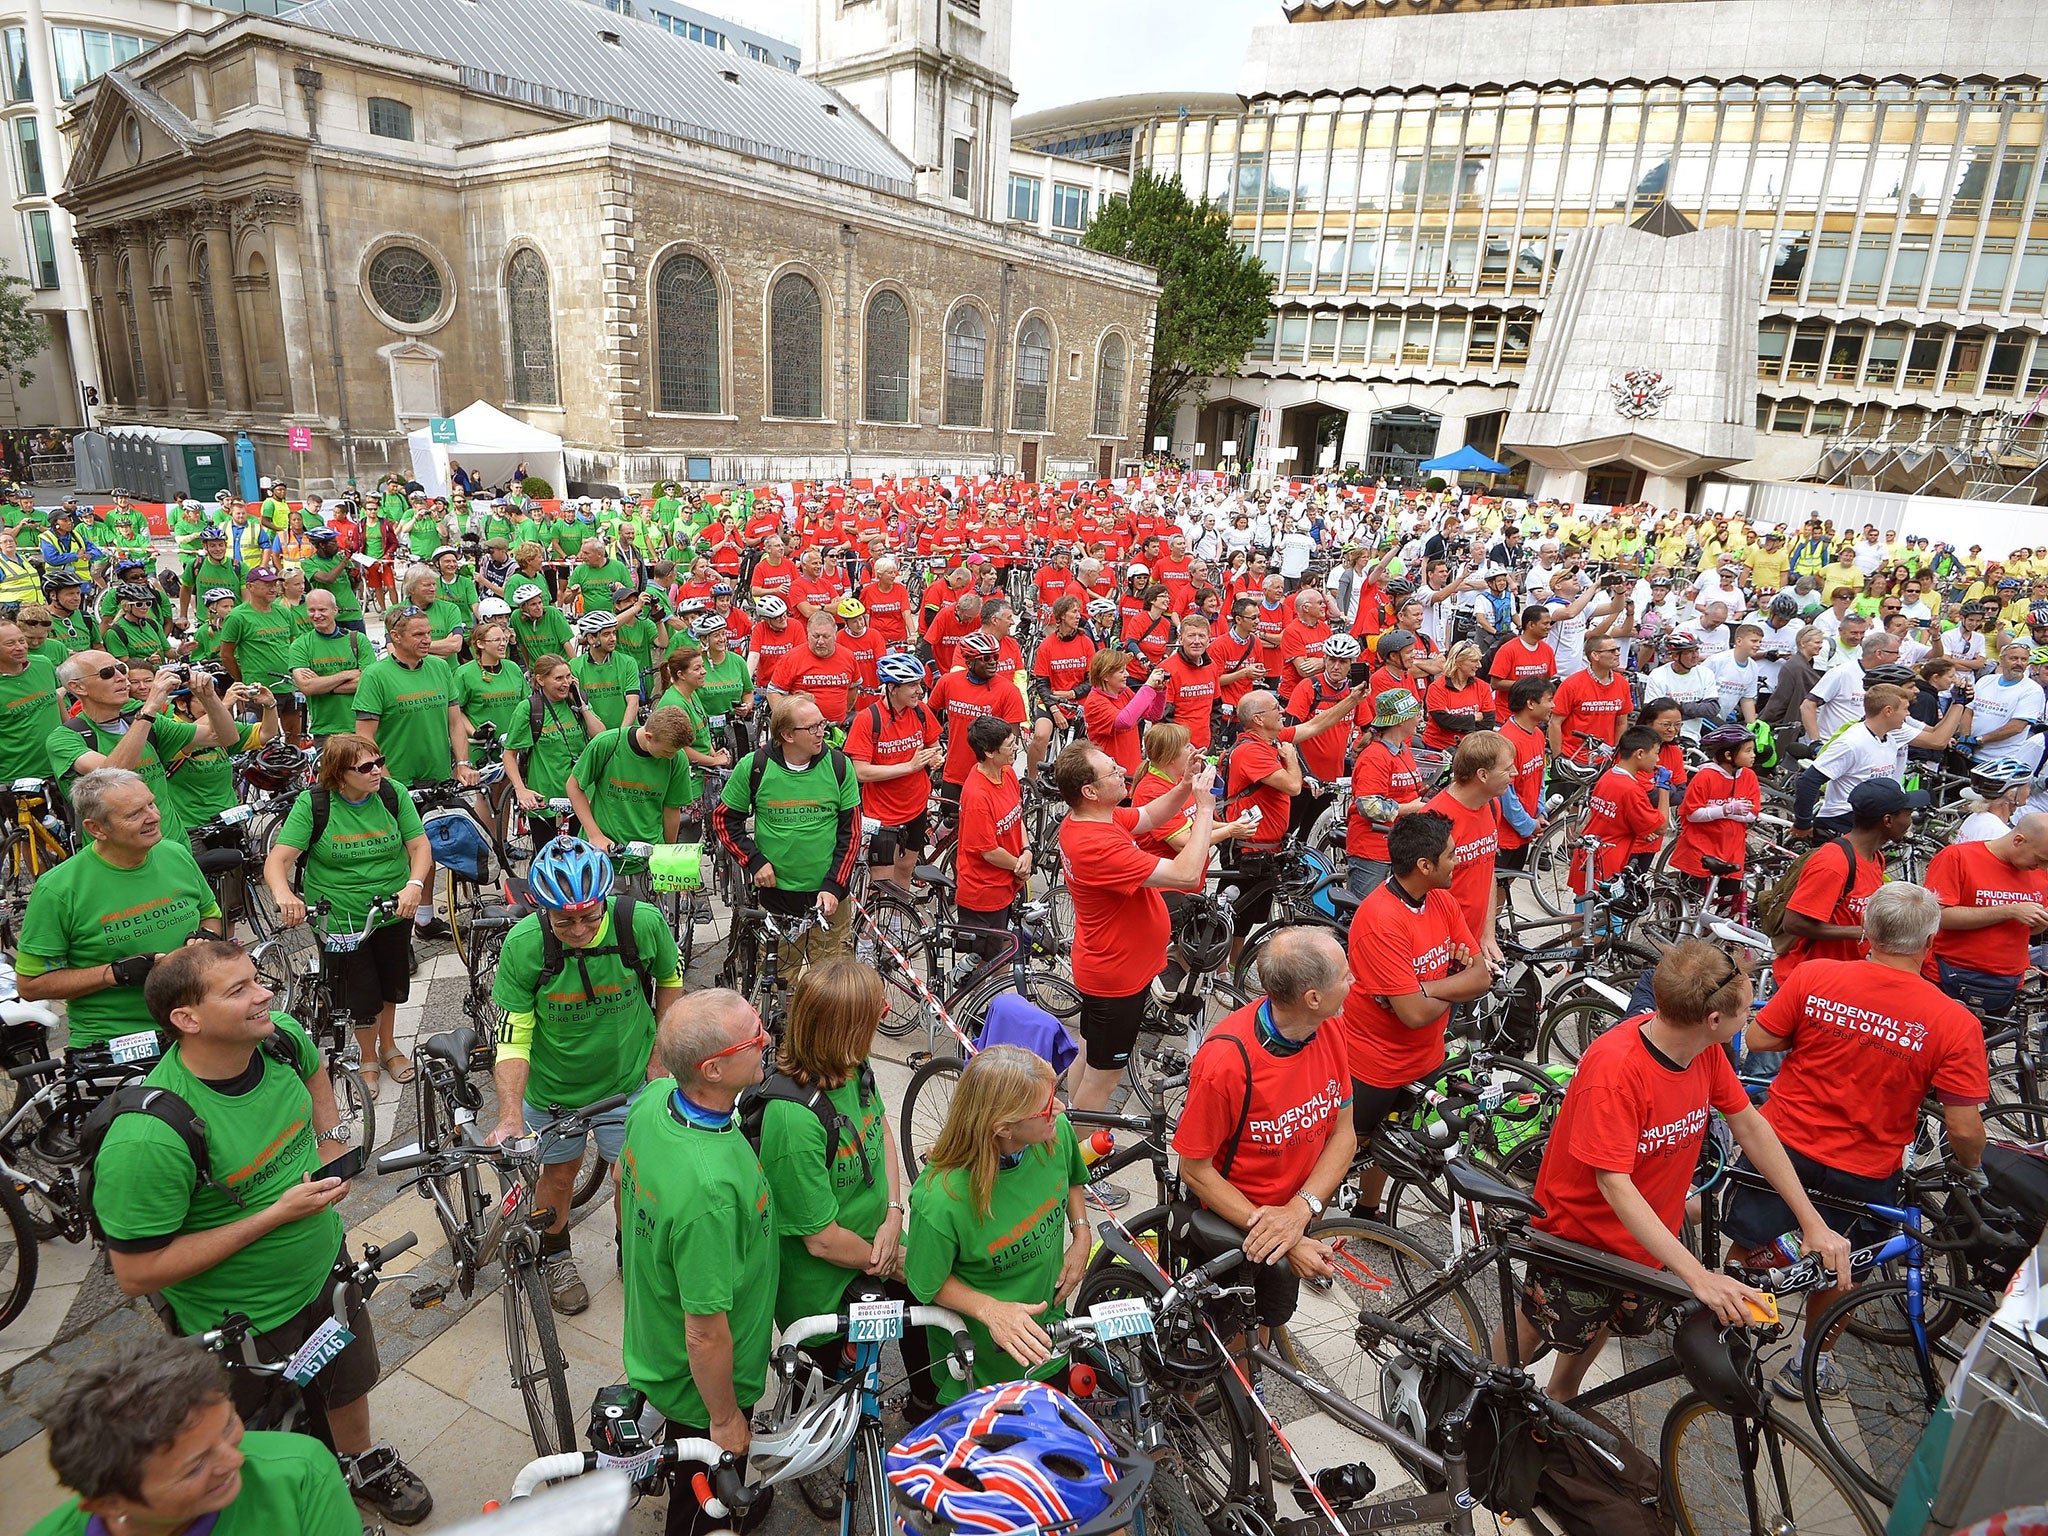 Some of the 639 cyclists bidding for a Guinness World Record for the largest bicycle bell ensemble, in front of the Guildhall in the City of London